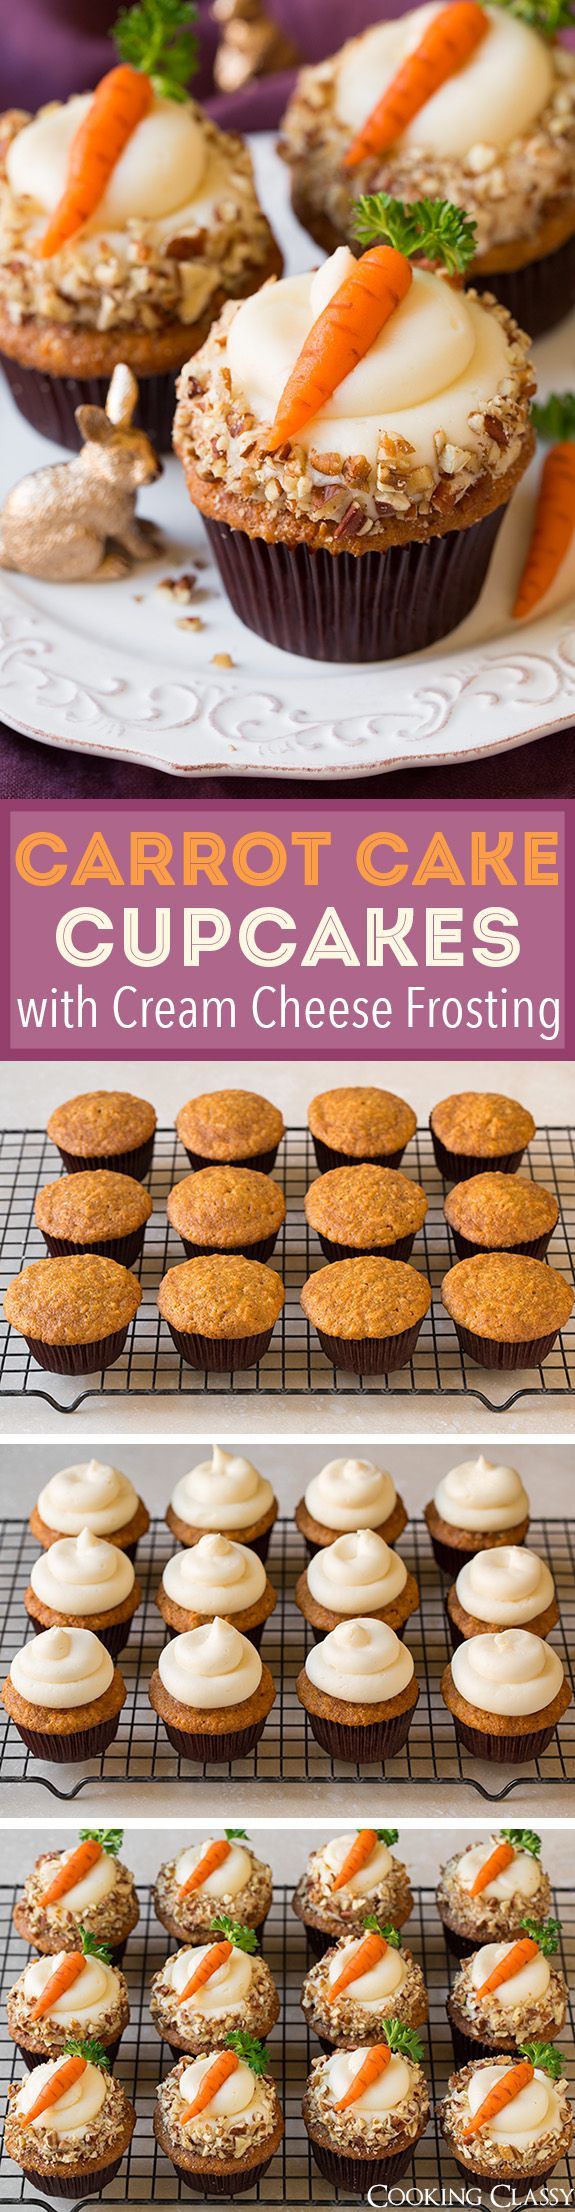 Carrot Cake Cupcakes with Cream Cheese Frosting (and Marzipan Carrots) – these are one of my all time FAVORITE cupcakes! Love